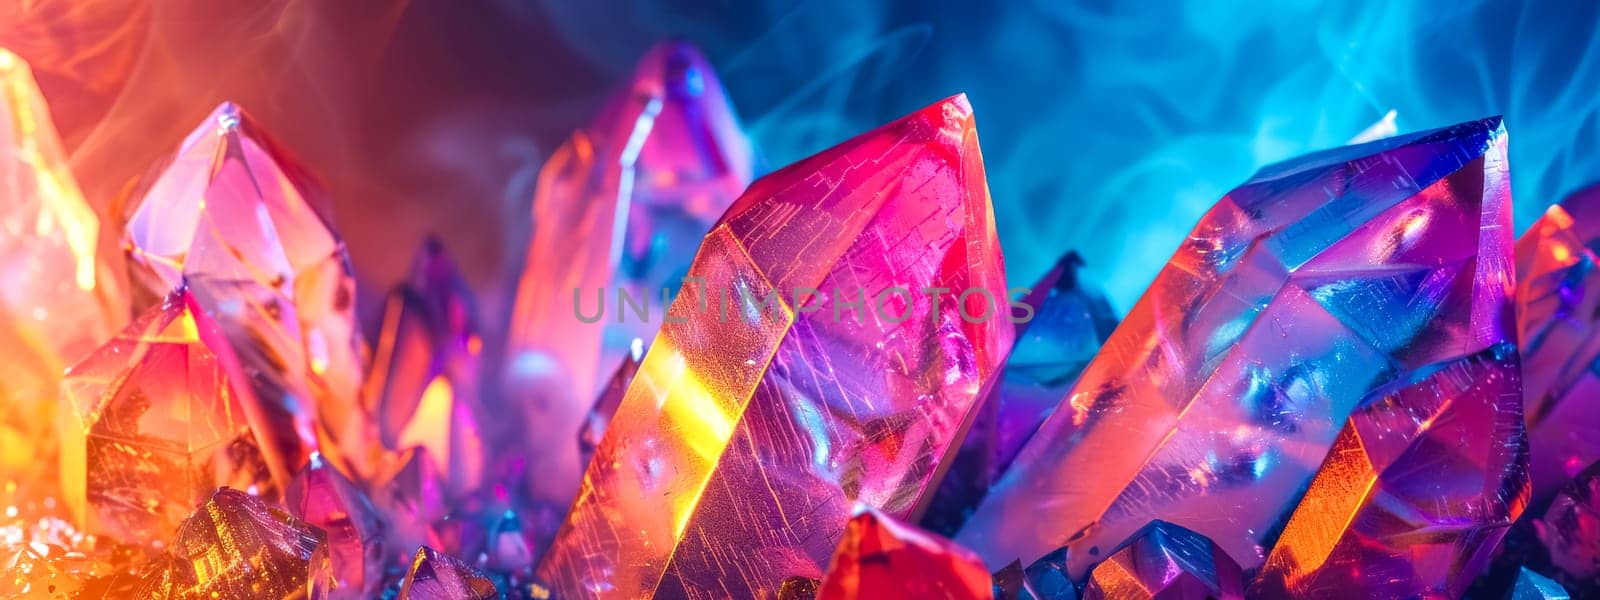 Abstract image of illuminated crystals in vibrant blue and red lights, suitable for backgrounds